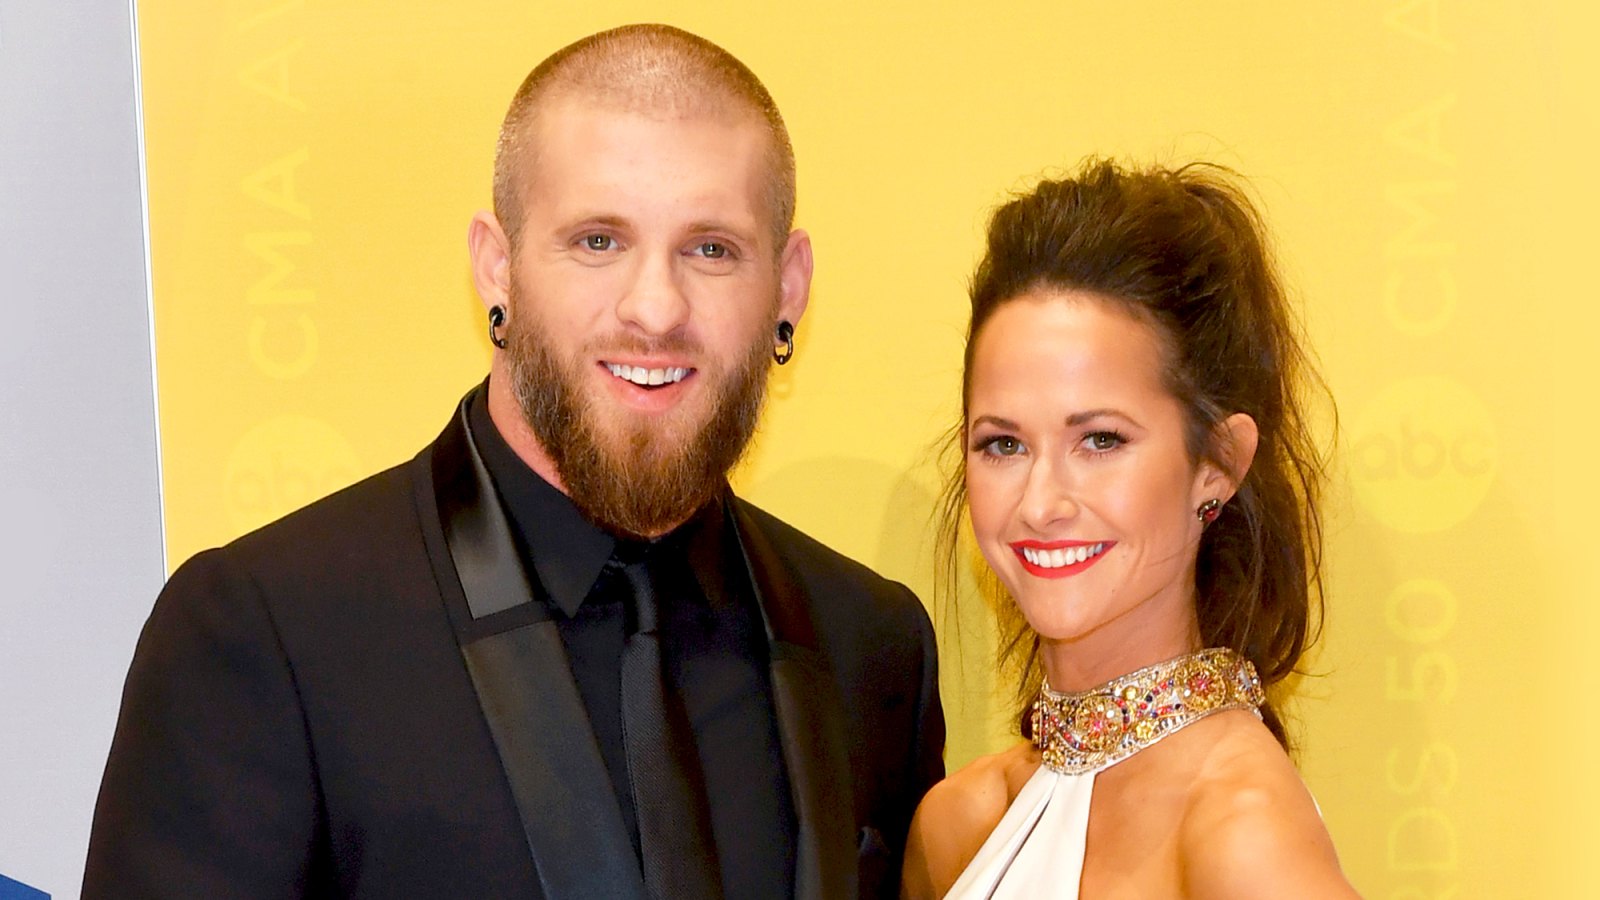 Brantley Gilbert and wife Amber Cochran attend the 50th annual CMA Awards at the Bridgestone Arena in Nashville, Tennessee.